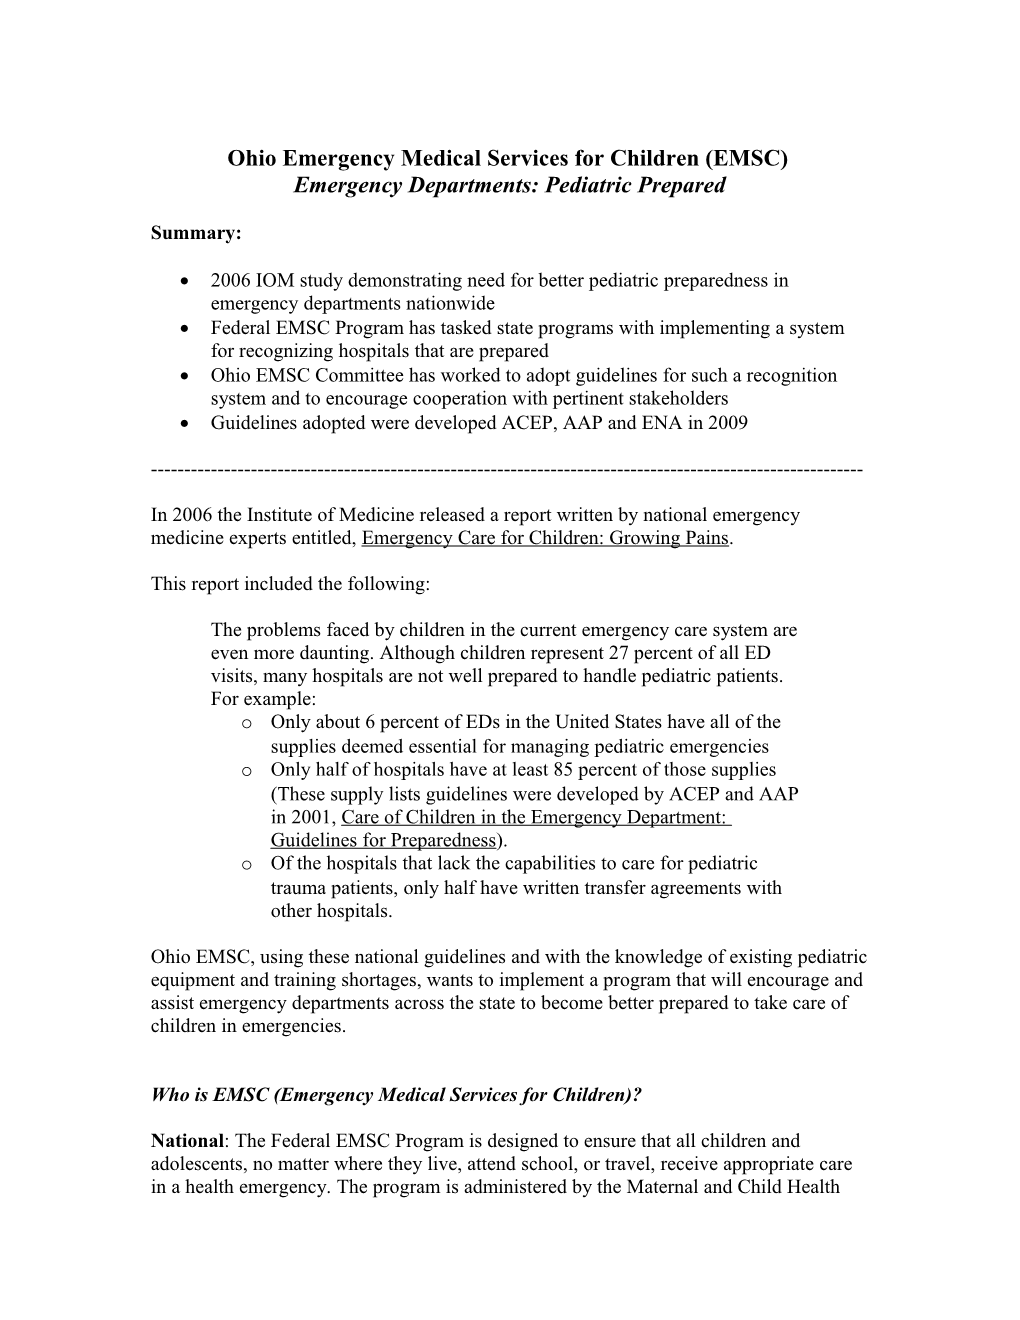 Emergency Care for Children: Growing Pains IOM Report Released in 2006 Done by National